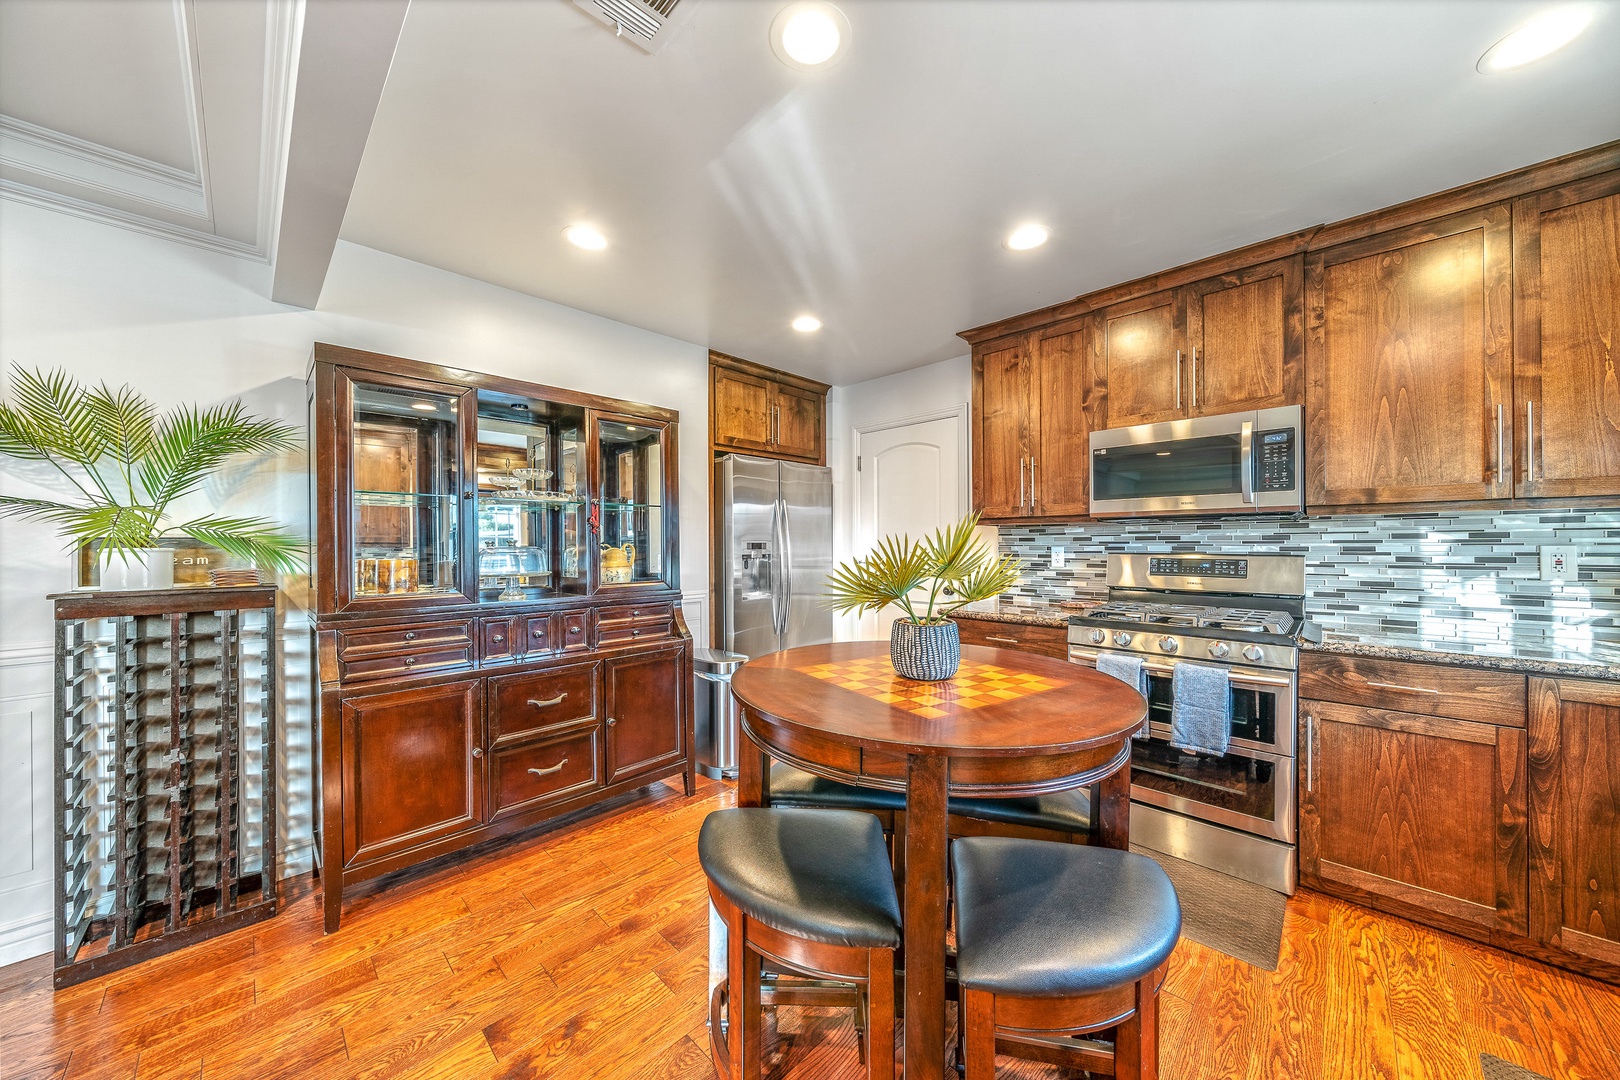 Full kitchen with stainless steel appliances